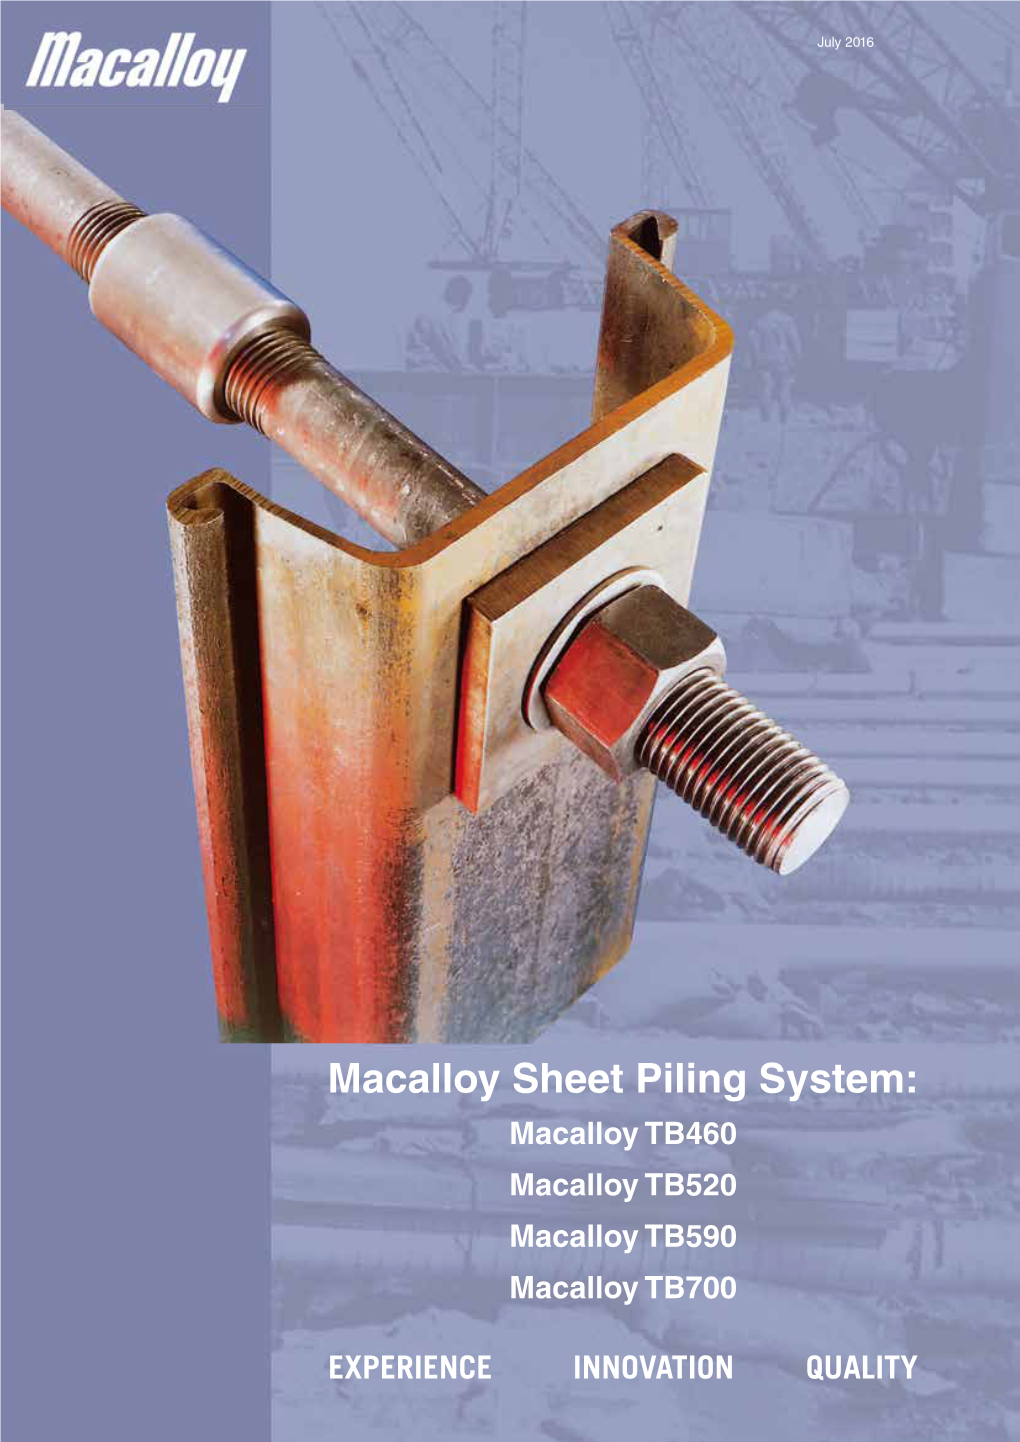 Macalloy Sheet Piling System: Macalloy TB460 Macalloy TB520 Macalloy TB590 Macalloy TB700